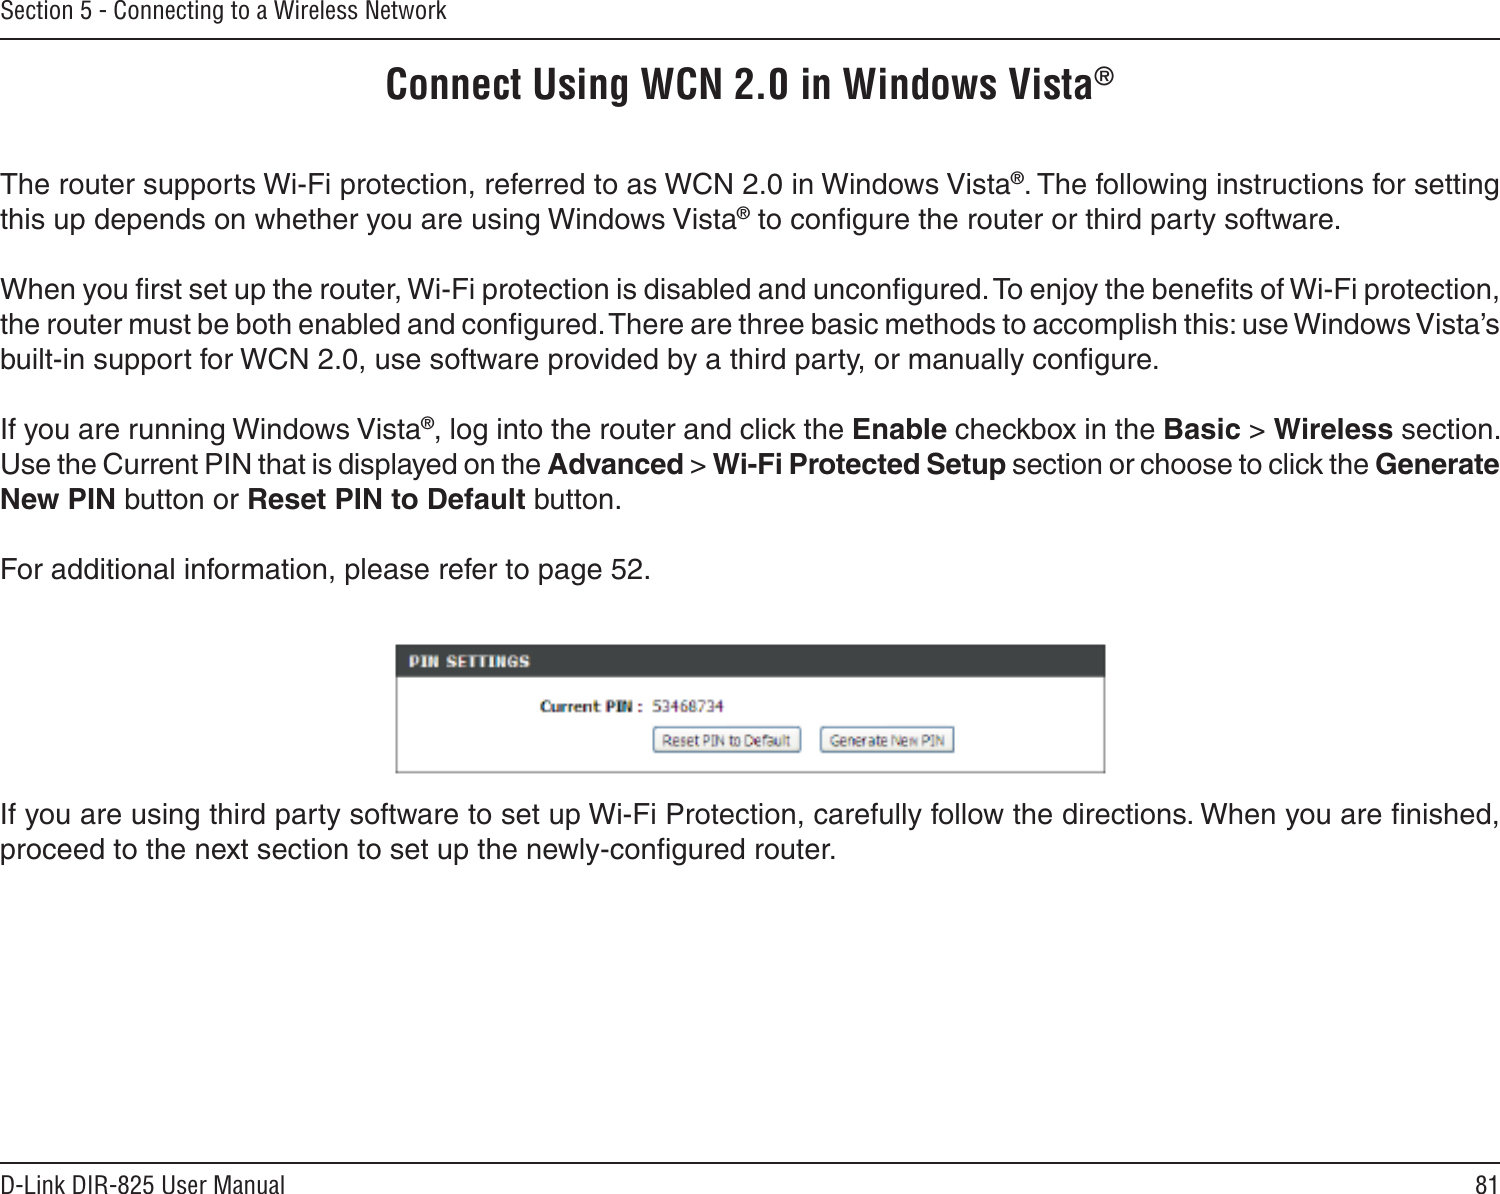 81D-Link DIR-825 User ManualSection 5 - Connecting to a Wireless NetworkConnect Using WCN 2.0 in Windows Vista® The router supports Wi-Fi protection, referred to as WCN 2.0 in Windows Vista®. The following instructions for setting this up depends on whether you are using Windows Vista® to conﬁgure the router or third party software.        When you ﬁrst set up the router, Wi-Fi protection is disabled and unconﬁgured. To enjoy the beneﬁts of Wi-Fi protection, the router must be both enabled and conﬁgured. There are three basic methods to accomplish this: use Windows Vista’s built-in support for WCN 2.0, use software provided by a third party, or manually conﬁgure. If you are running Windows Vista®, log into the router and click the Enable checkbox in the Basic &gt; Wireless section. Use the Current PIN that is displayed on the Advanced &gt; Wi-Fi Protected Setup section or choose to click the Generate New PIN button or Reset PIN to Default button. For additional information, please refer to page 52.If you are using third party software to set up Wi-Fi Protection, carefully follow the directions. When you are ﬁnished, proceed to the next section to set up the newly-conﬁgured router. 